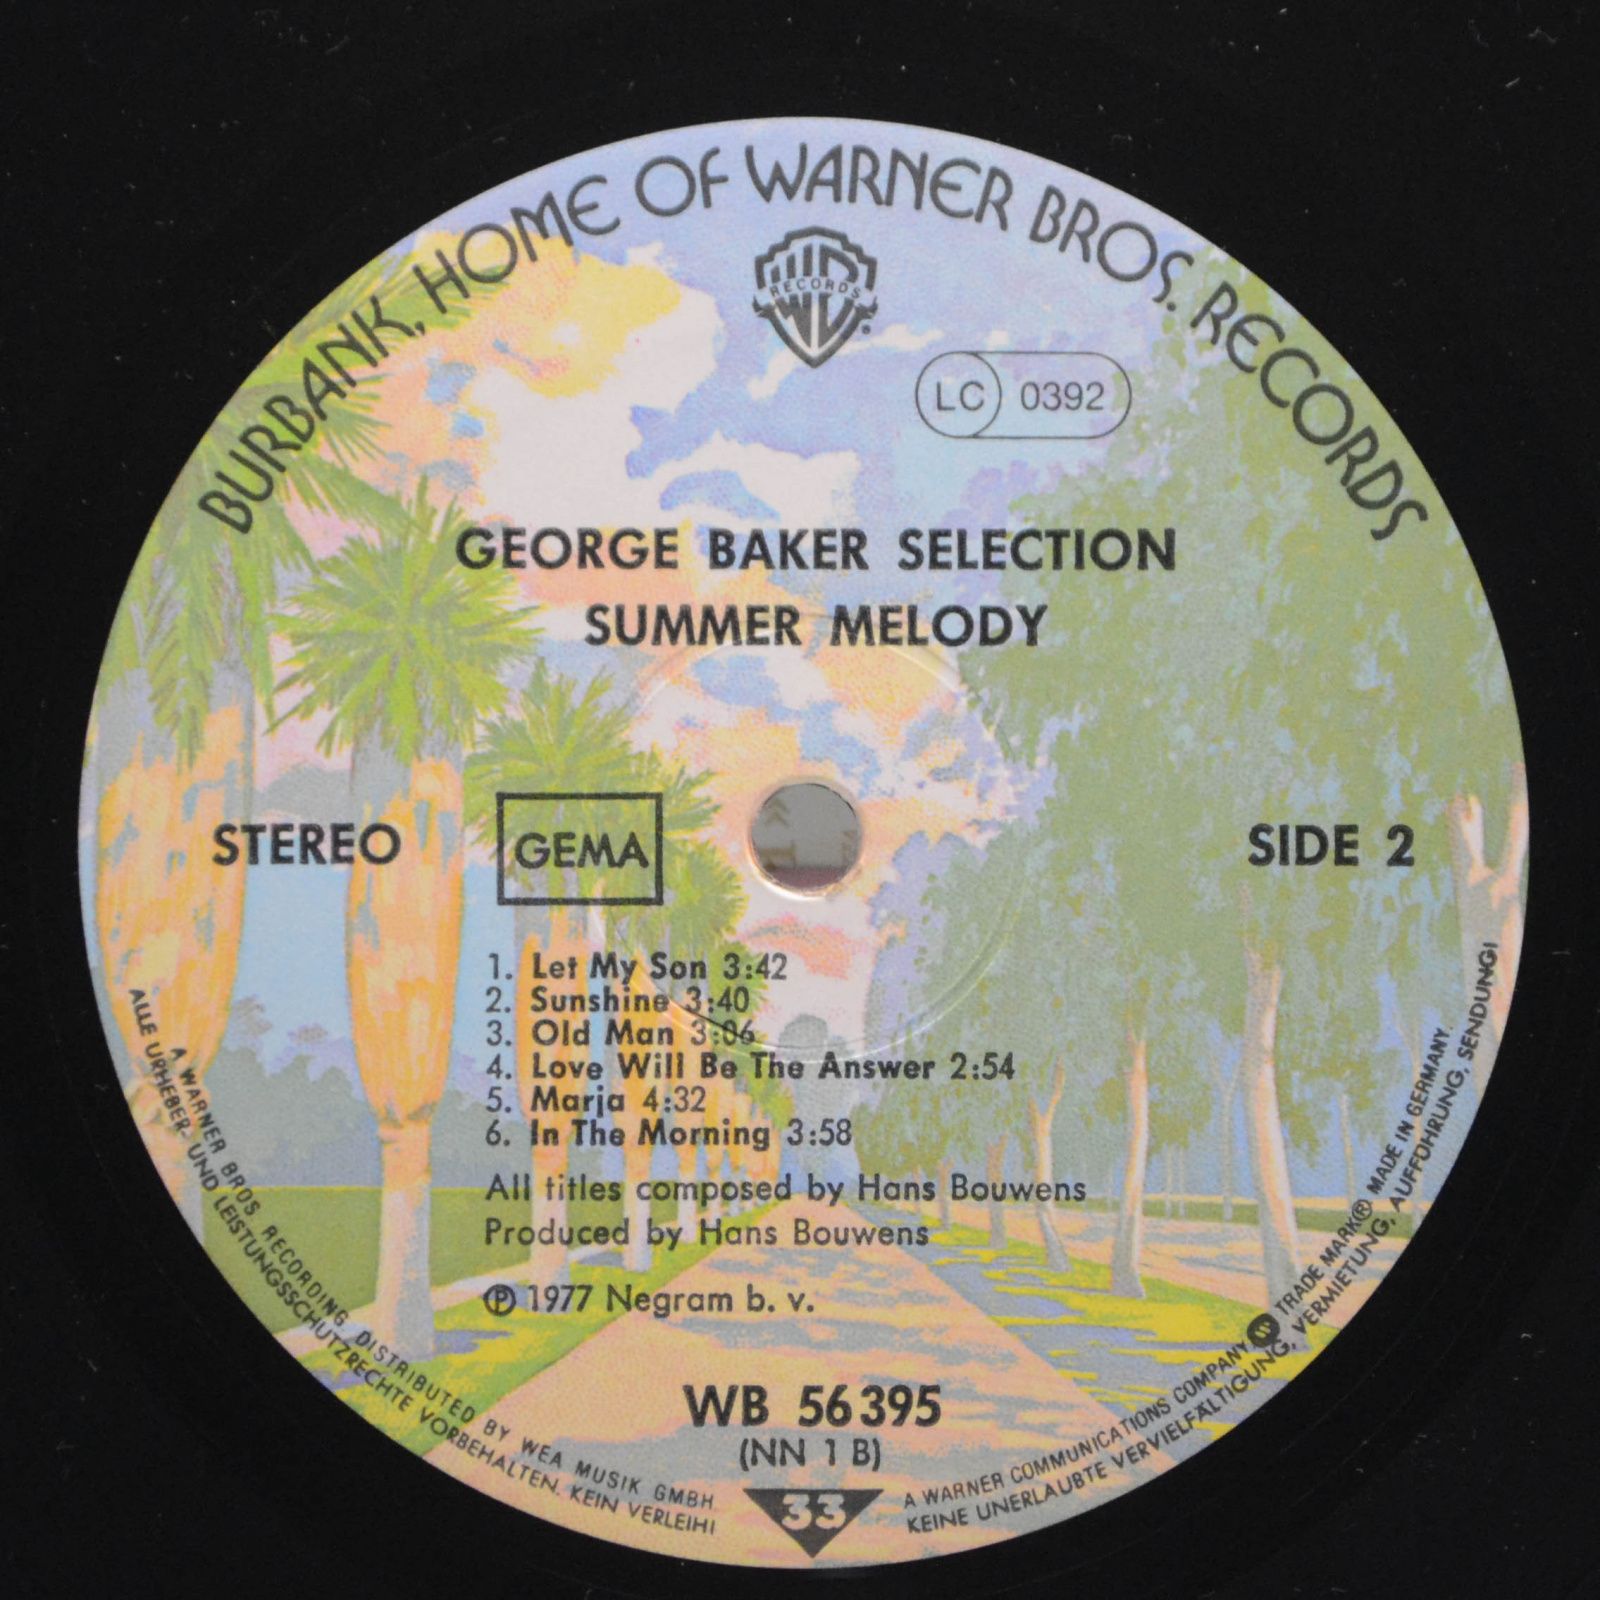 George Baker Selection — Summer Melody, 1977